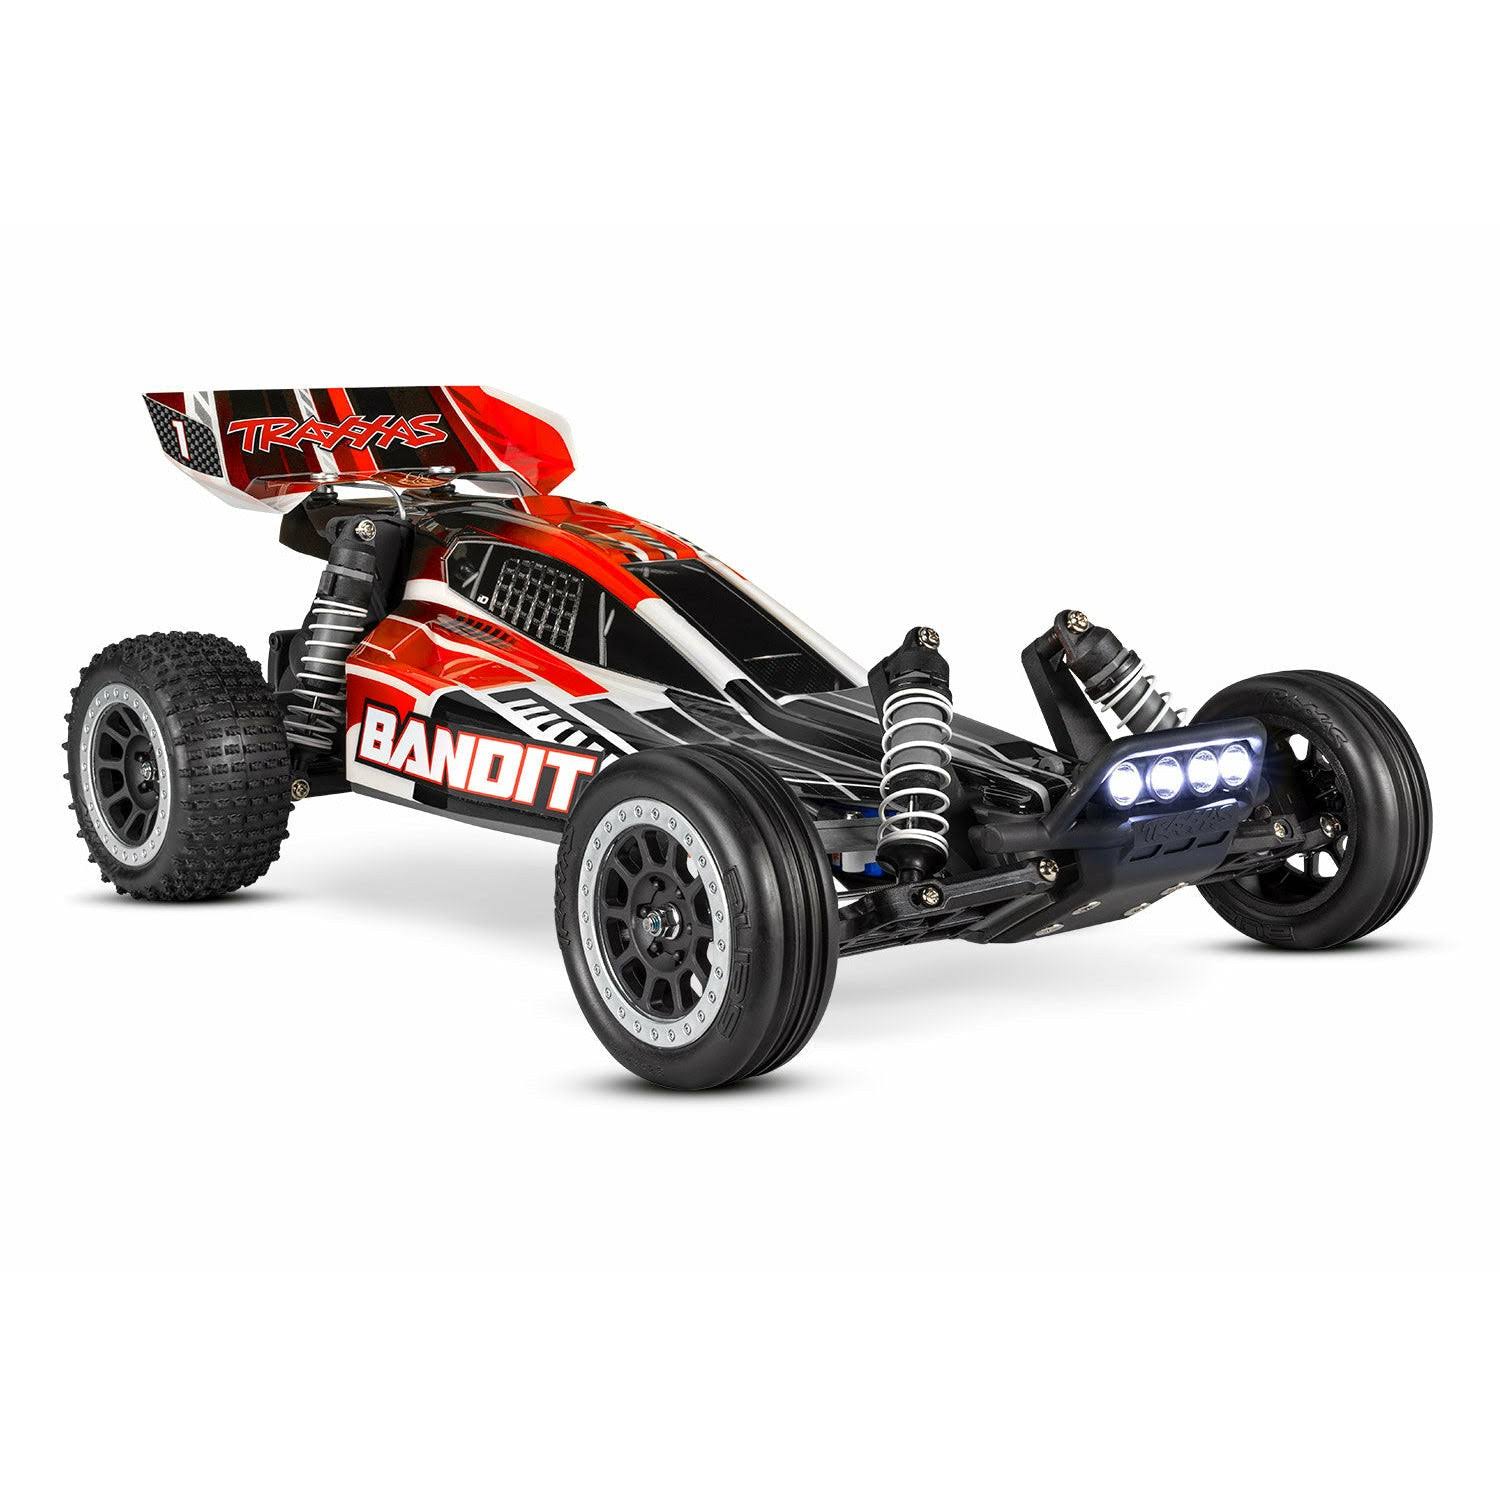 Traxxas Bandit 1/10 RTR with LED Light Kit Red